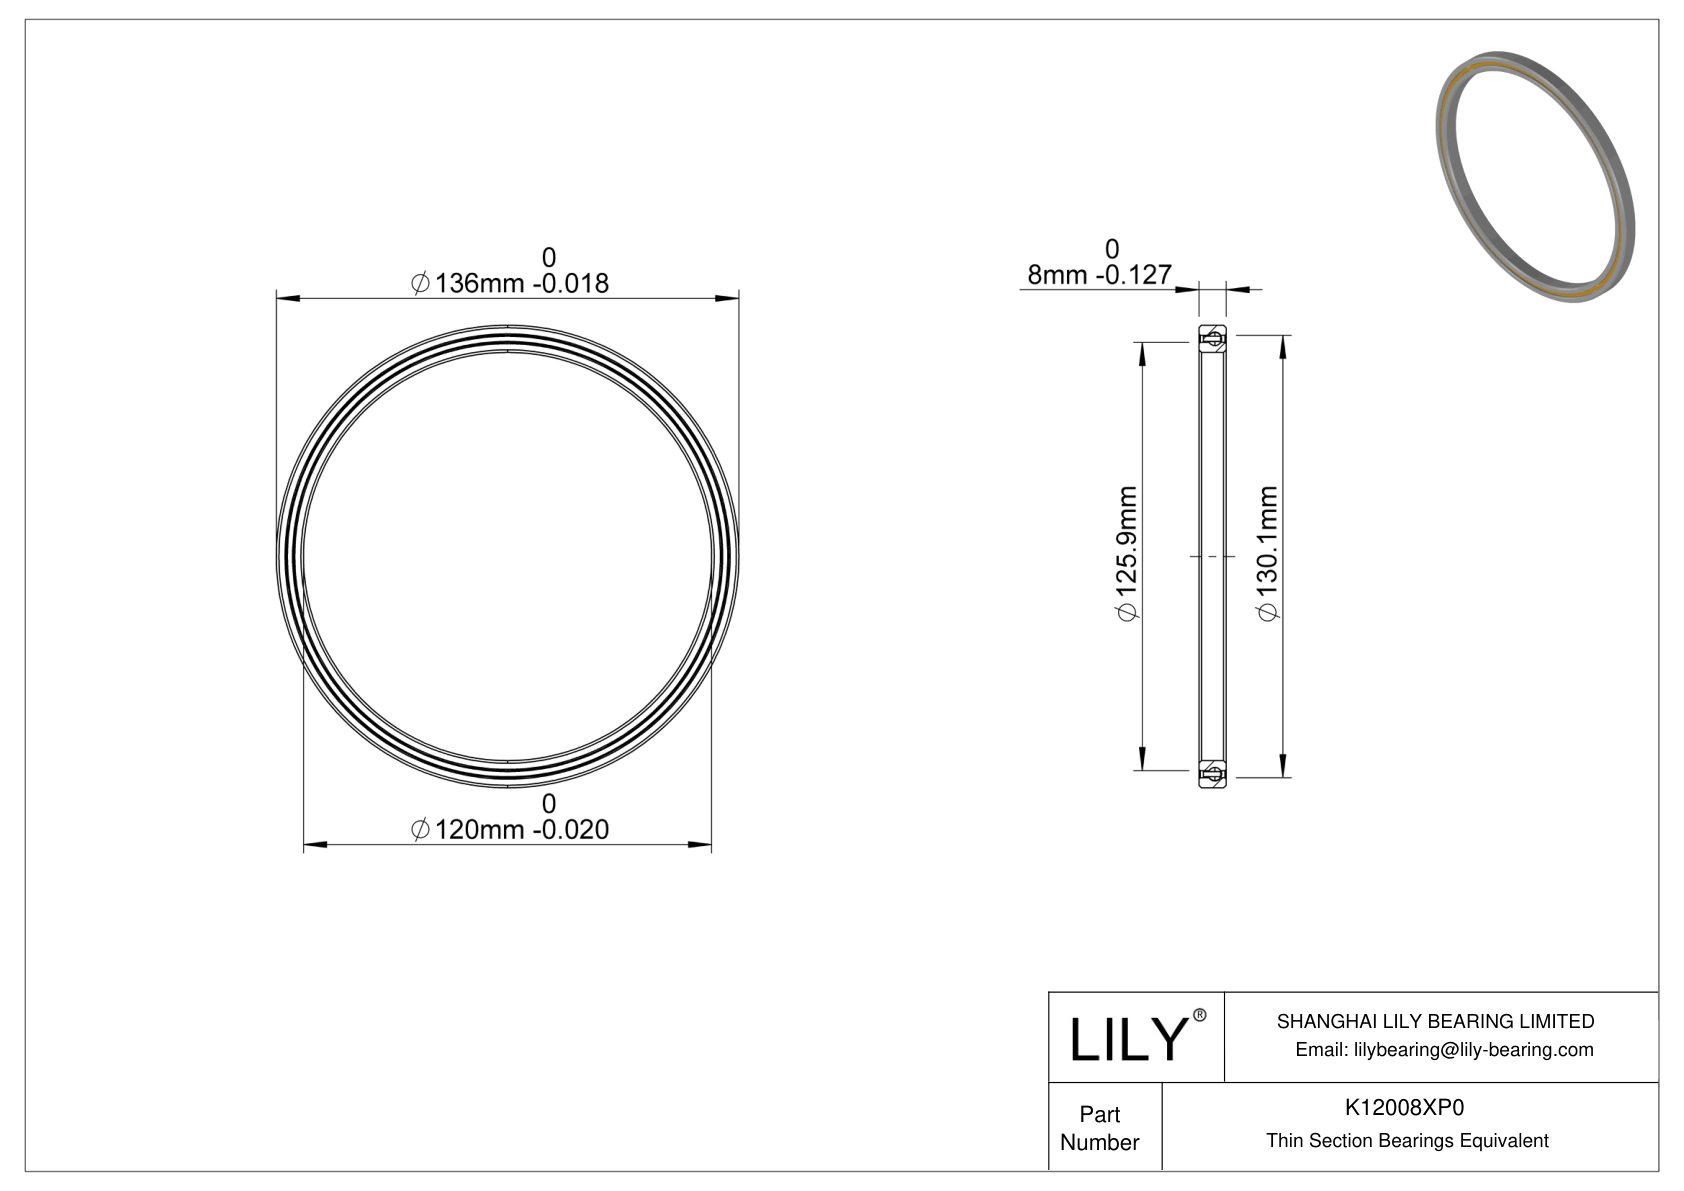 K12008XP0 Constant Section (CS) Bearings cad drawing